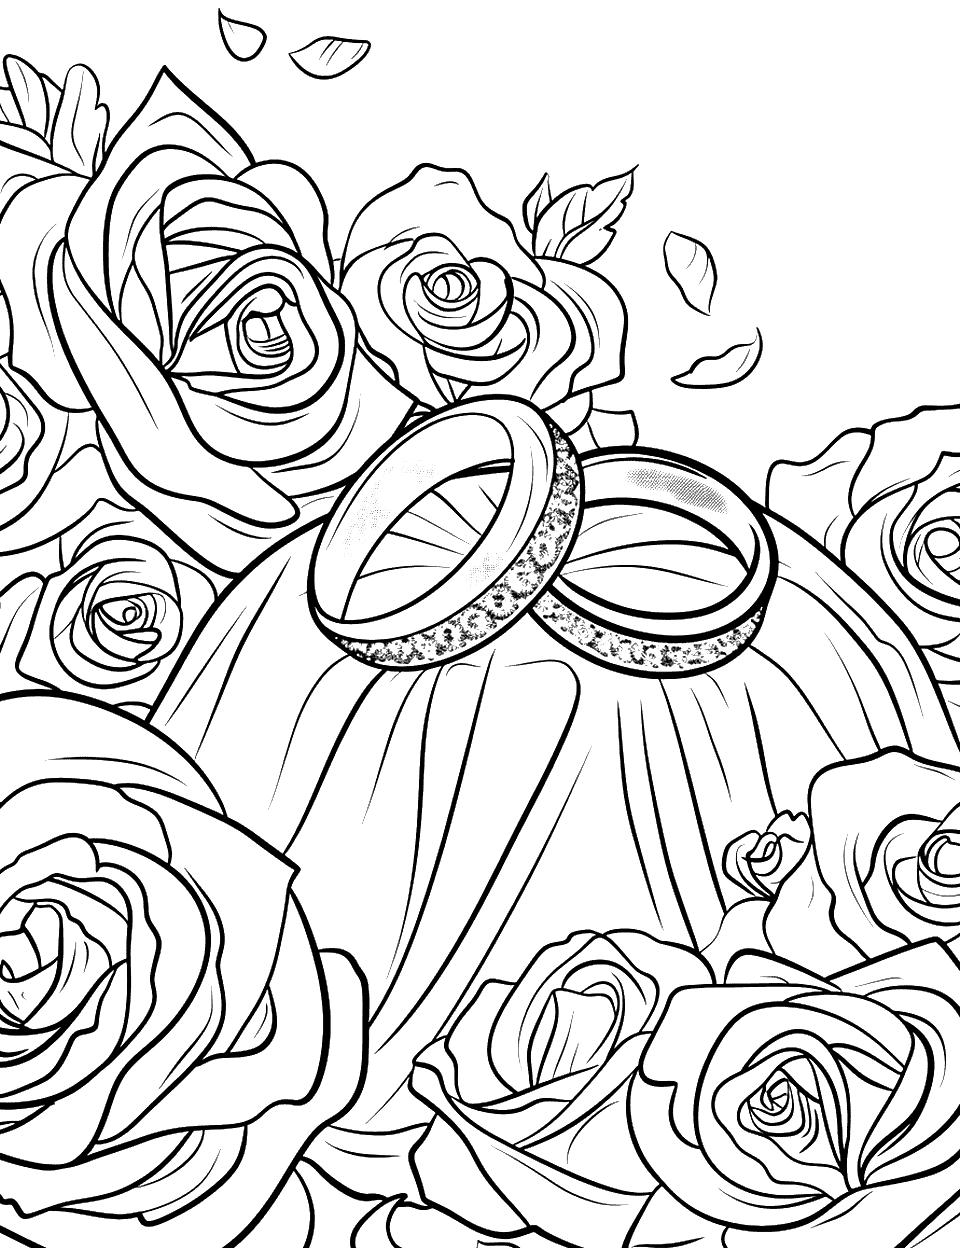 Wedding Bands Close-Up Coloring Page - Two shining wedding bands on a satin pillow, with roses around.